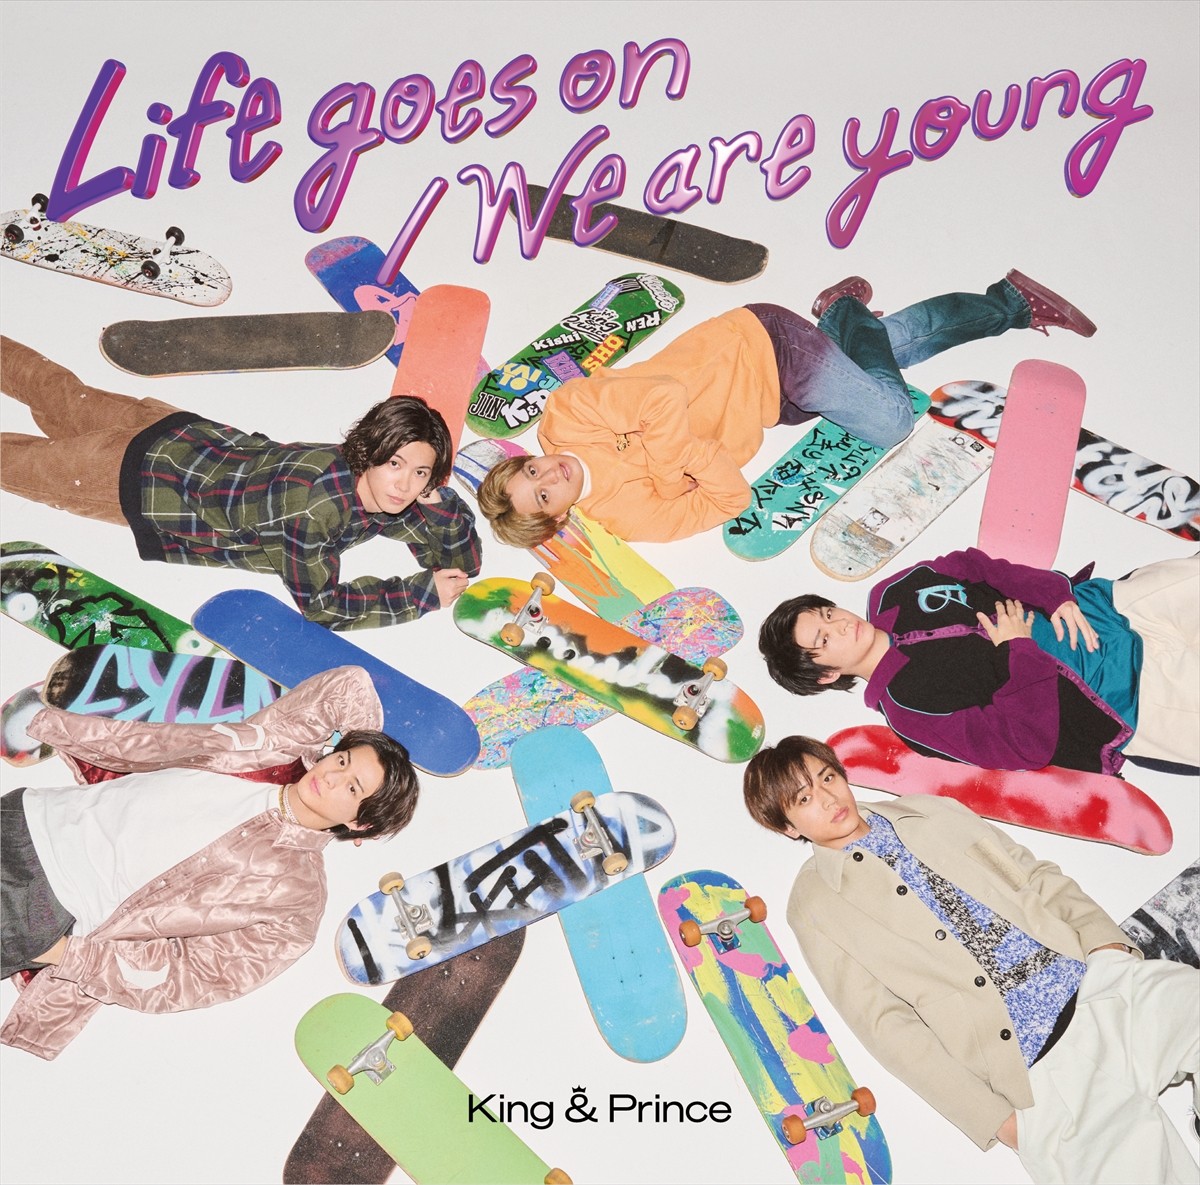 King ＆ Prince、最新シングル「Life goes on／We are young」ジャケット＆アーティスト写真を公開